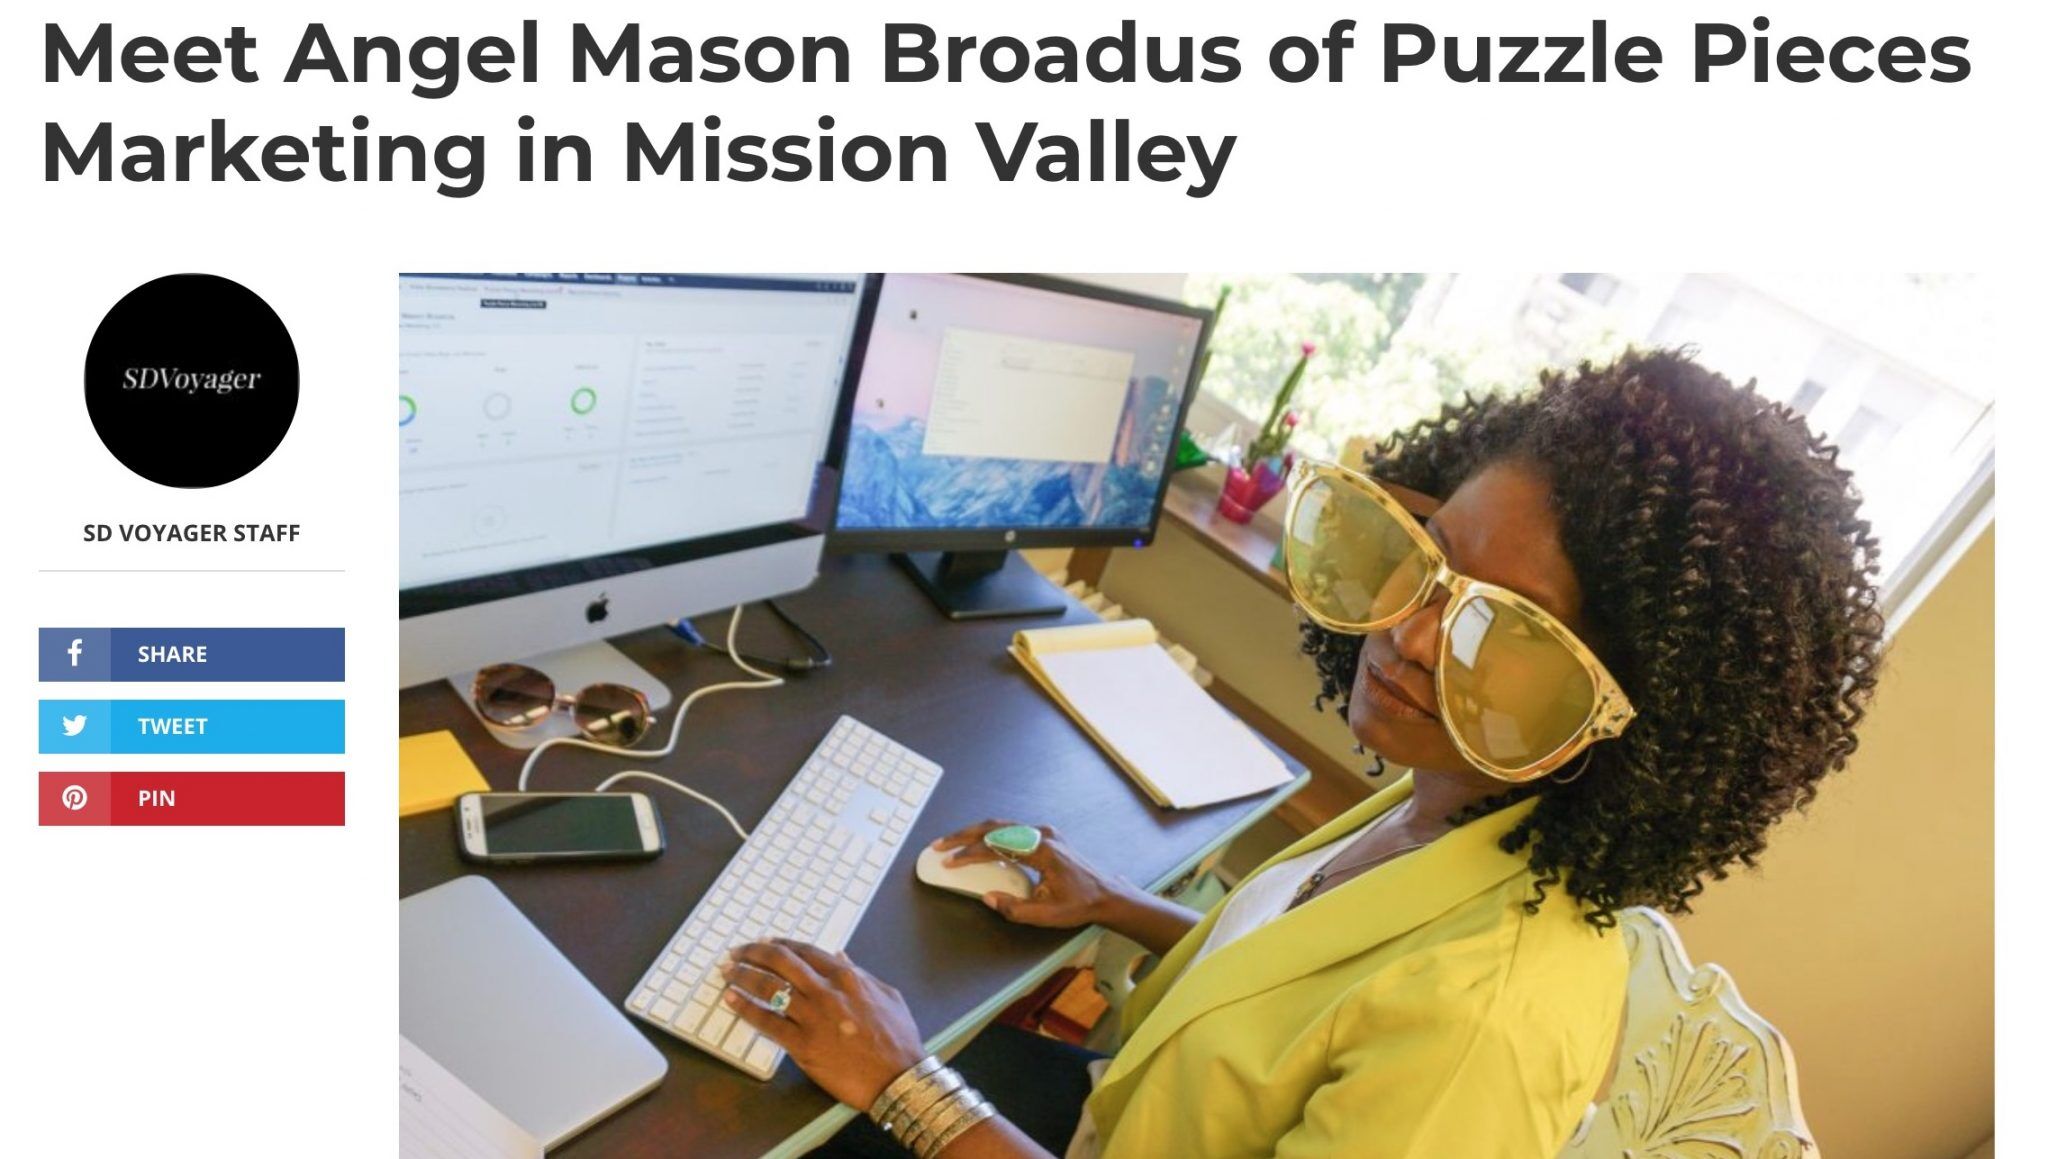 Rising Stars SD Voyager feature President of Puzzle Pieces Marketing - Angel Mason Broadus